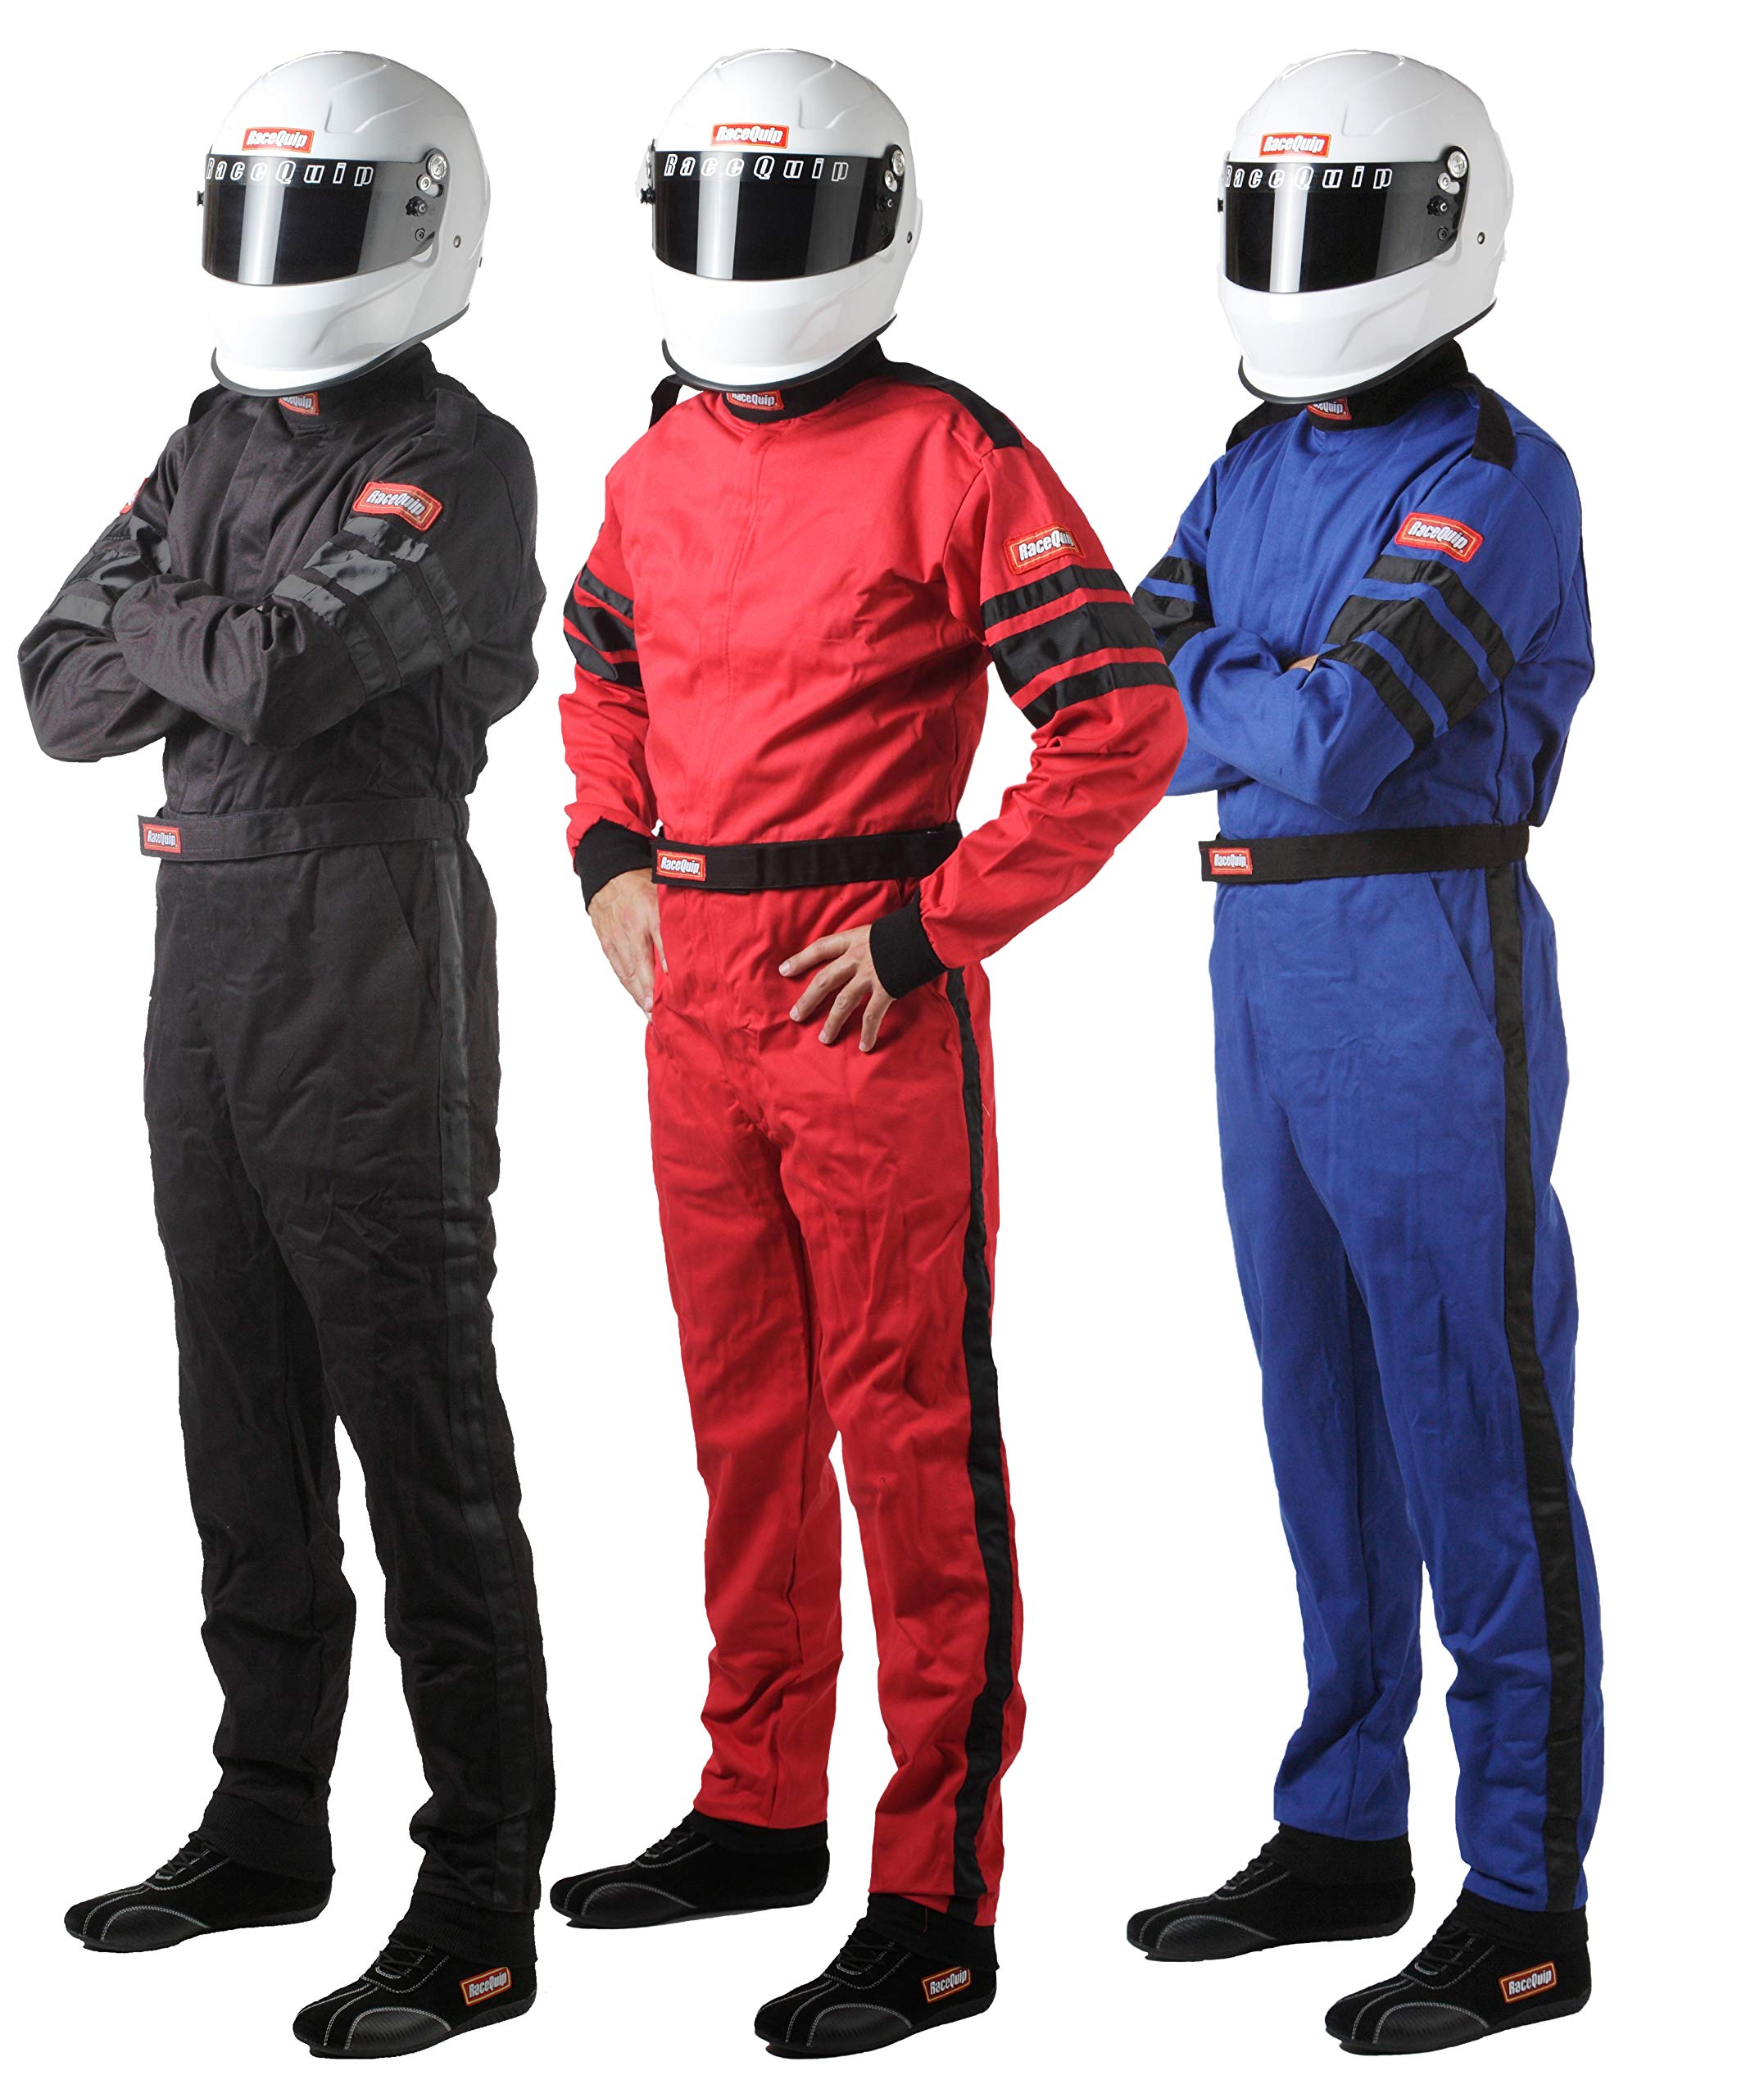 sfi driving suits